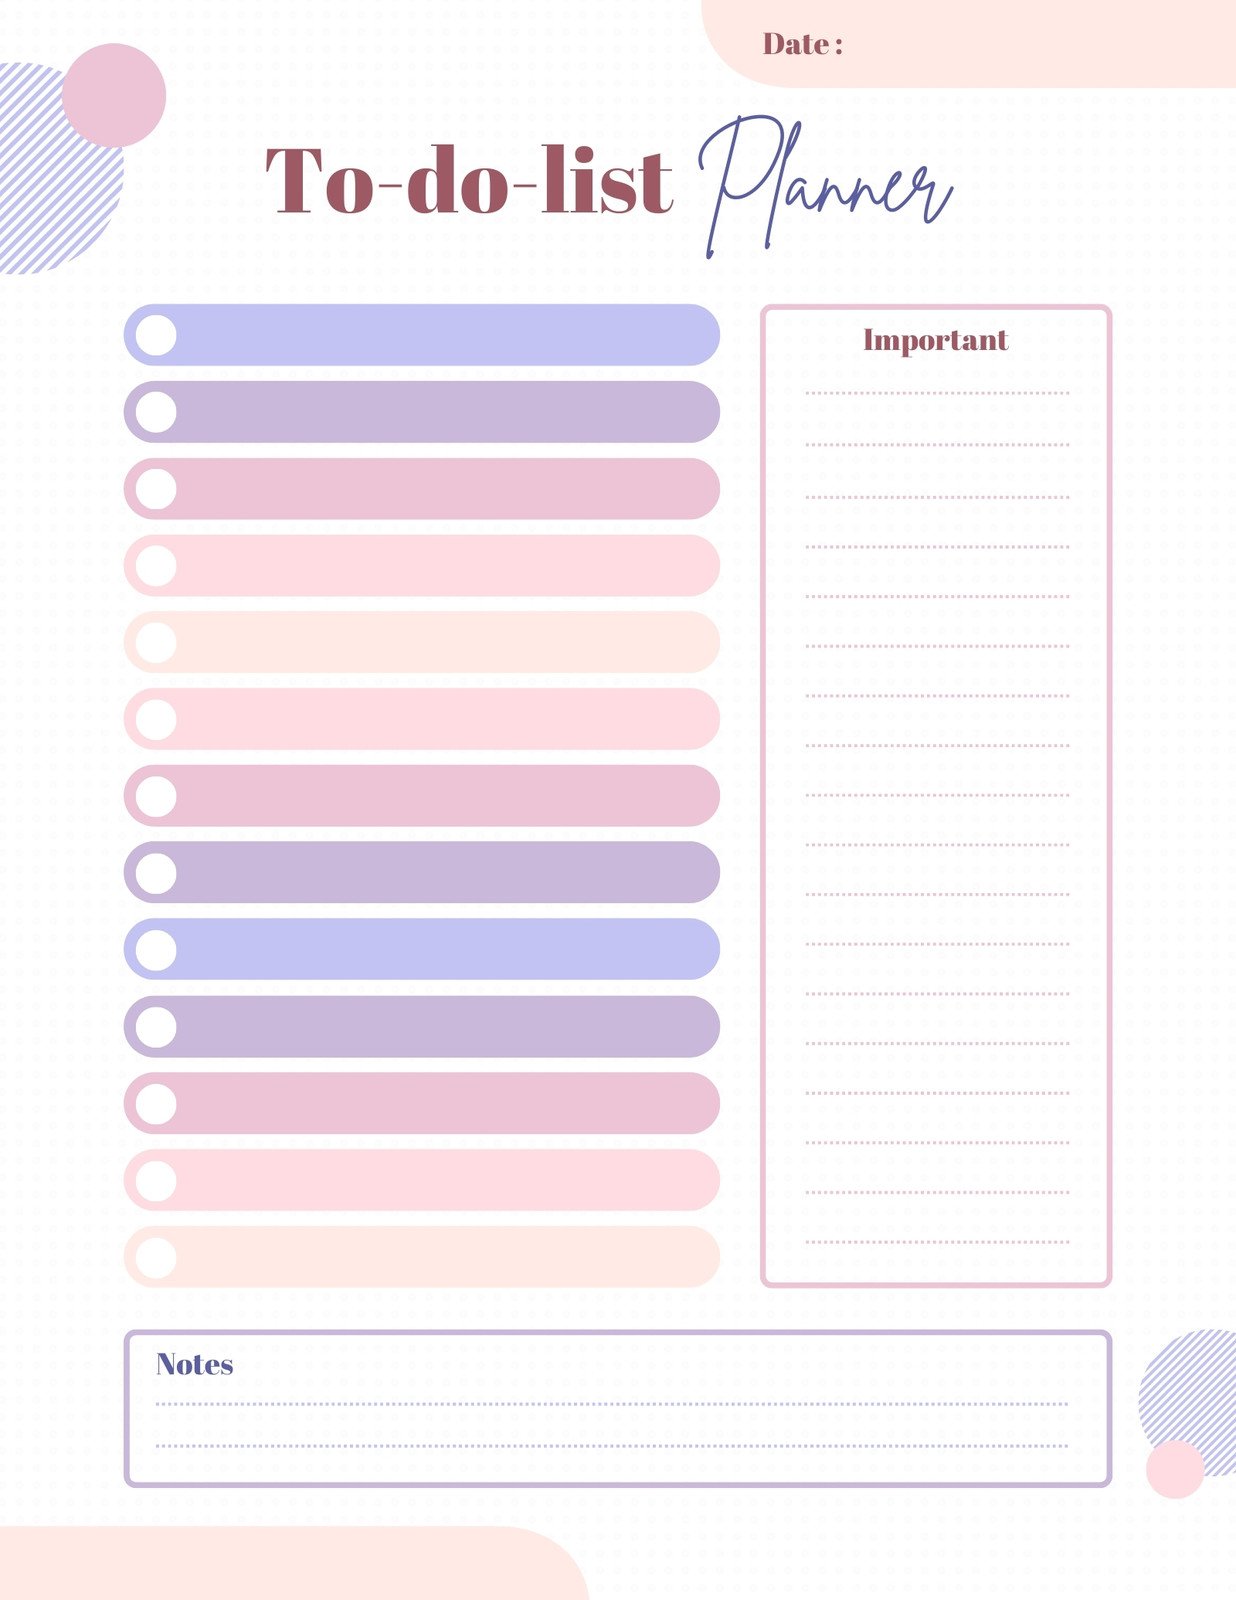 To-do Template, To Do List Layout, Todo List Layout